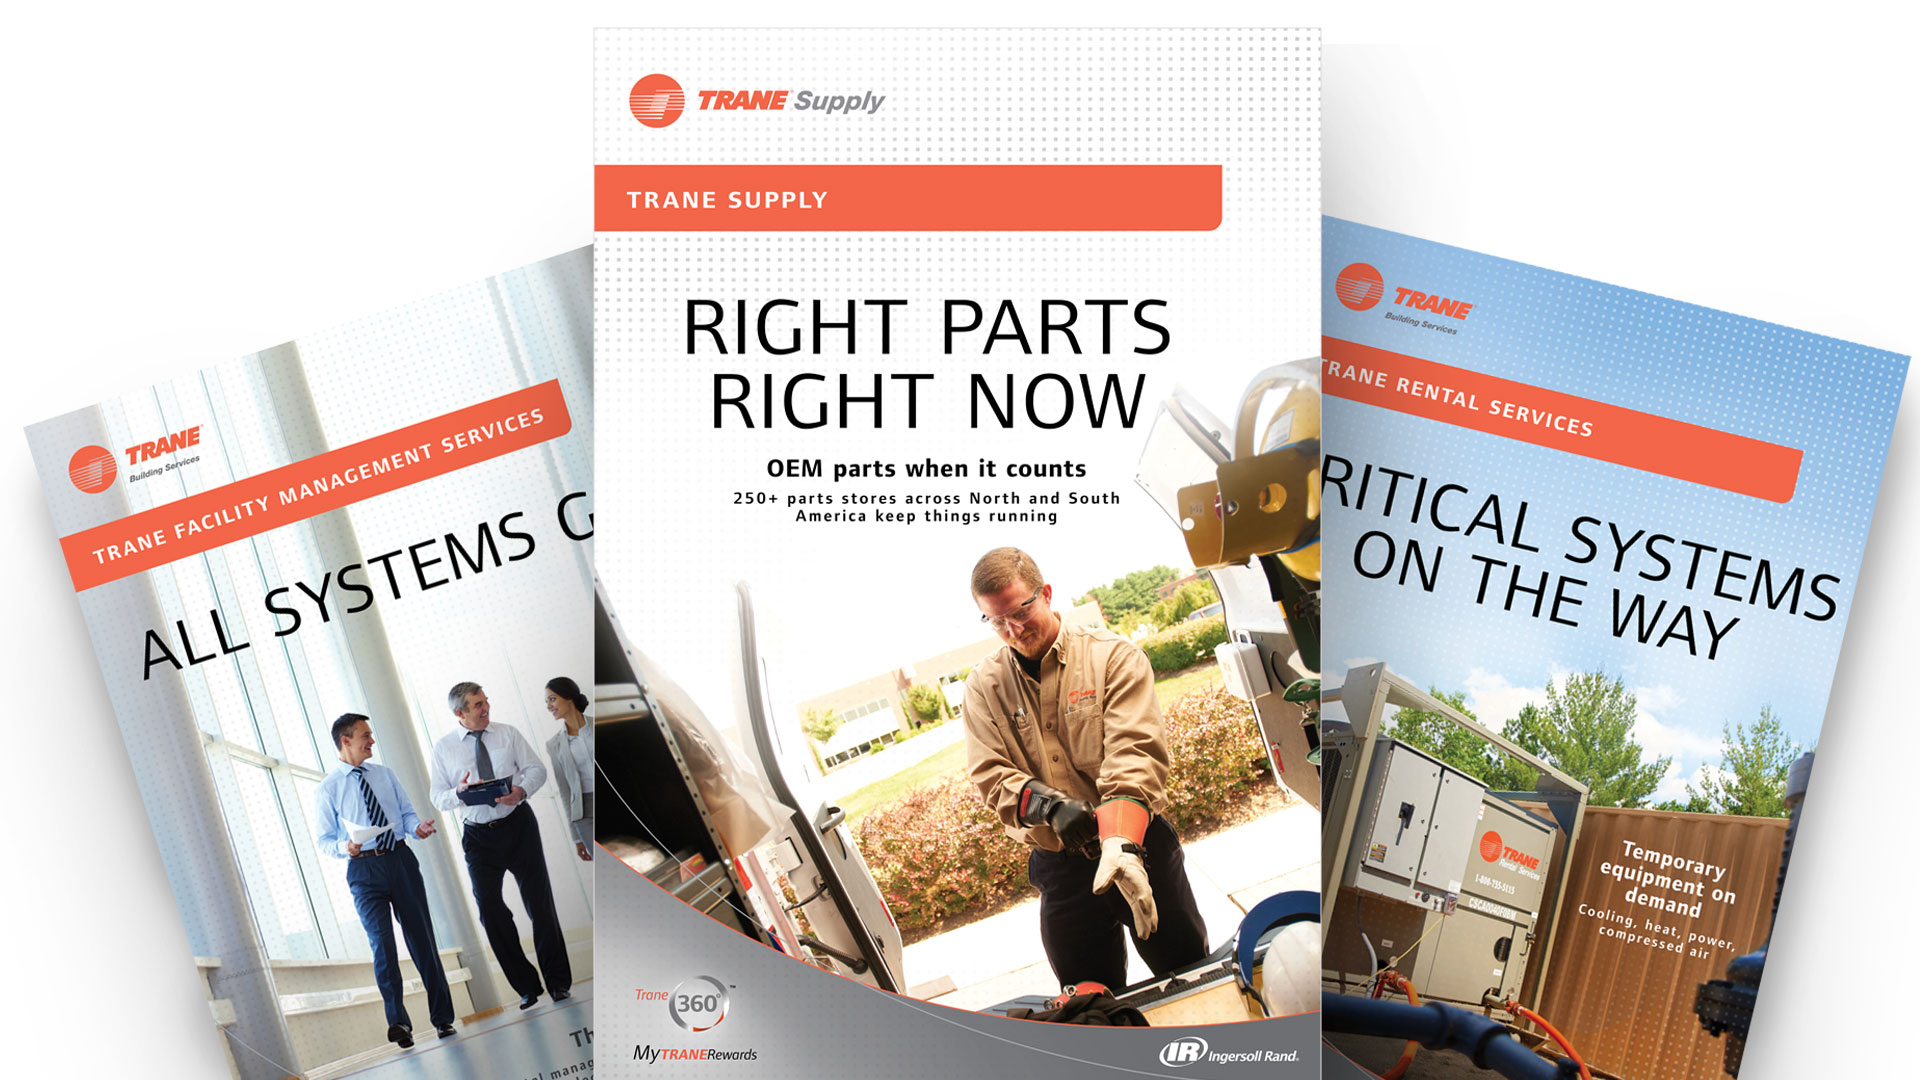 Full-color Ingersoll Rand Trane brochures for facility management services, OEM parts and rental services